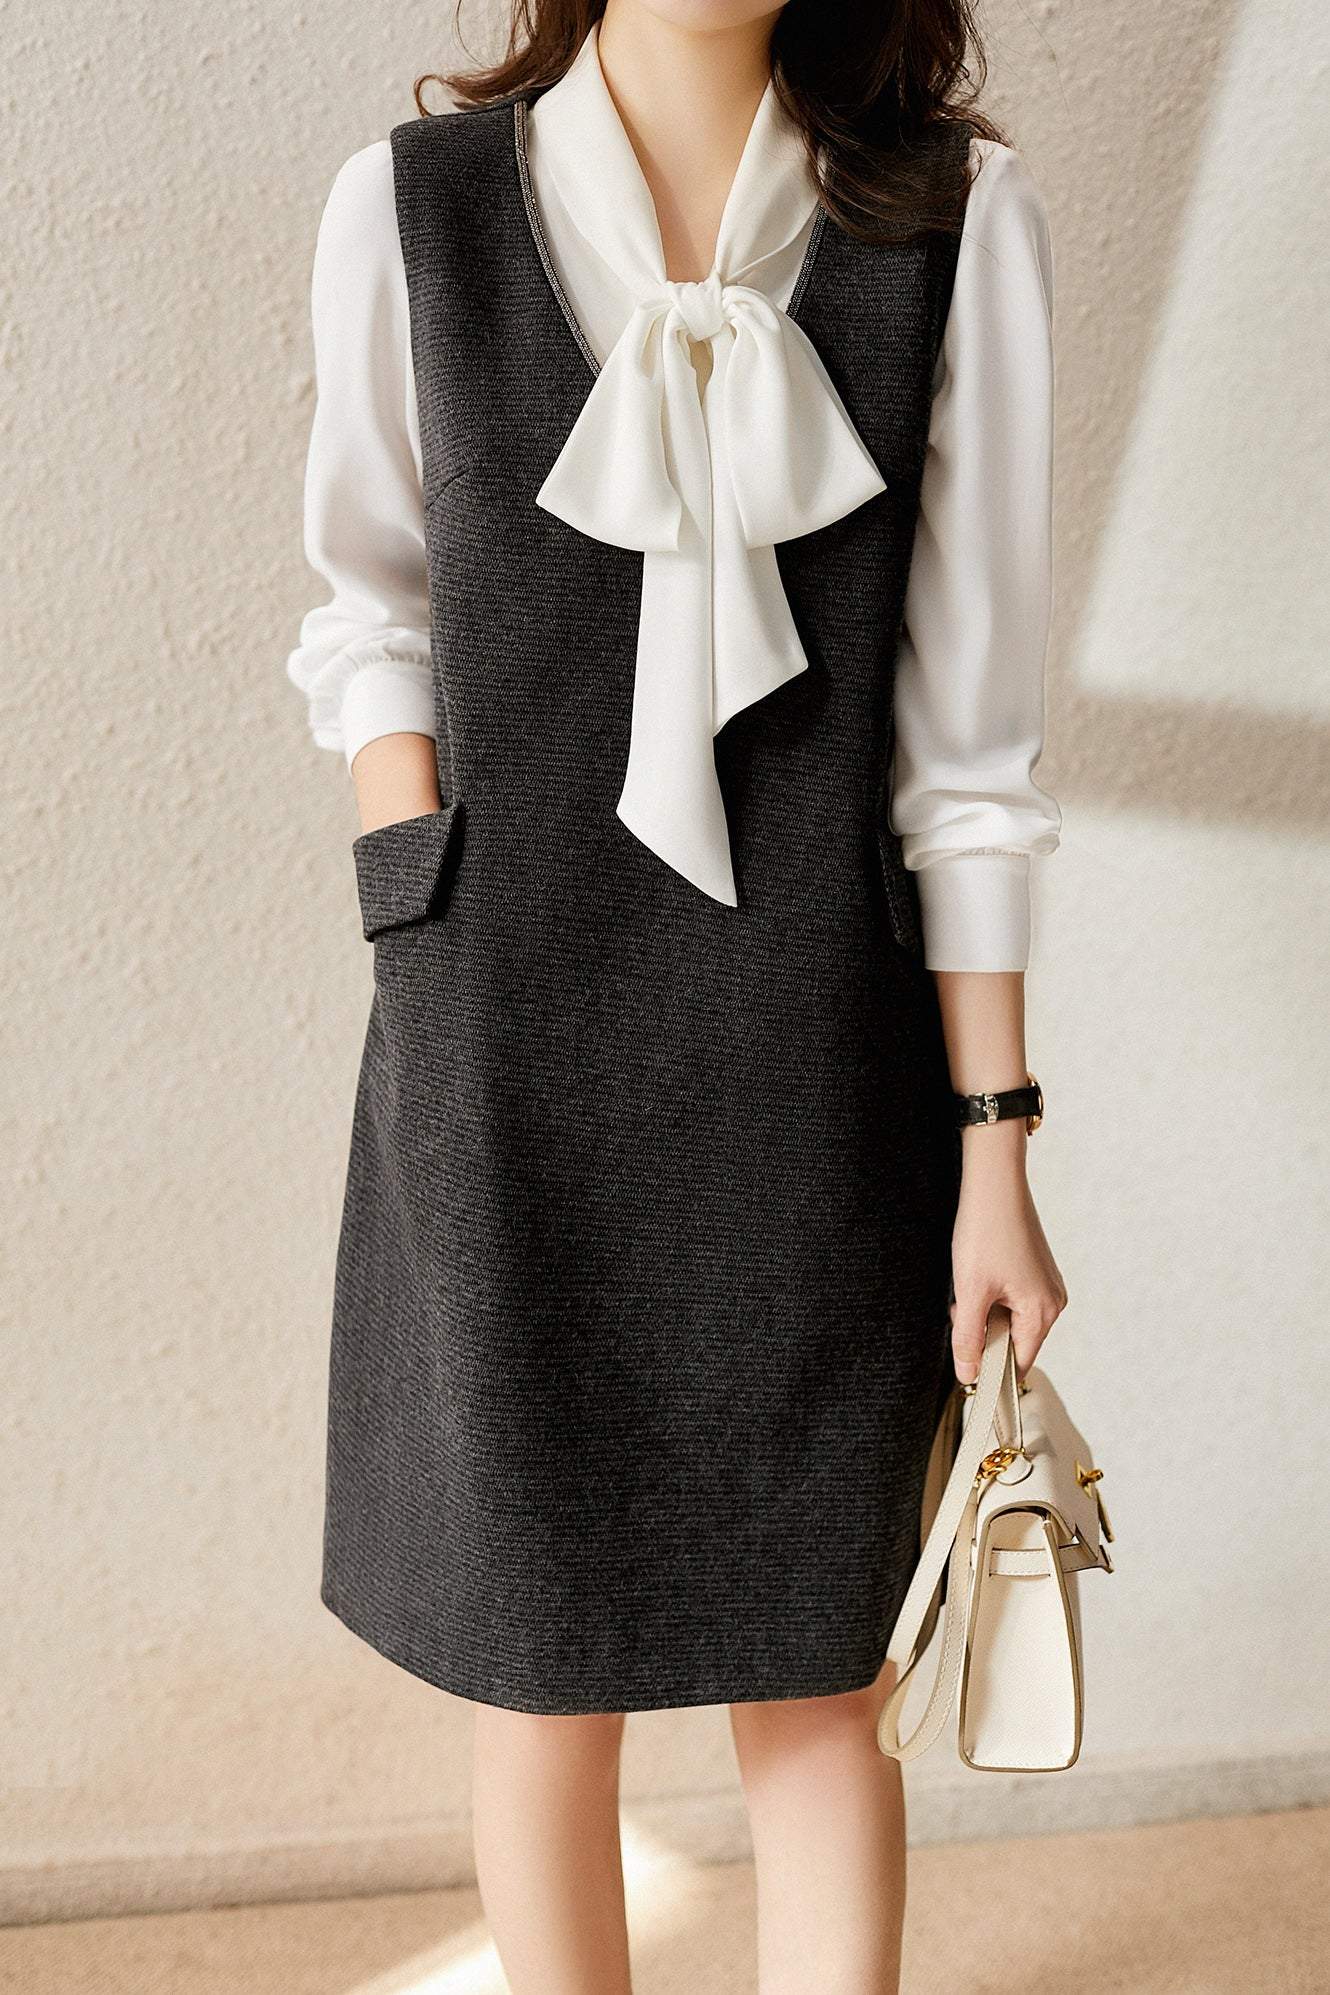 Chanel-style V-neck simple jumper skirt with lining